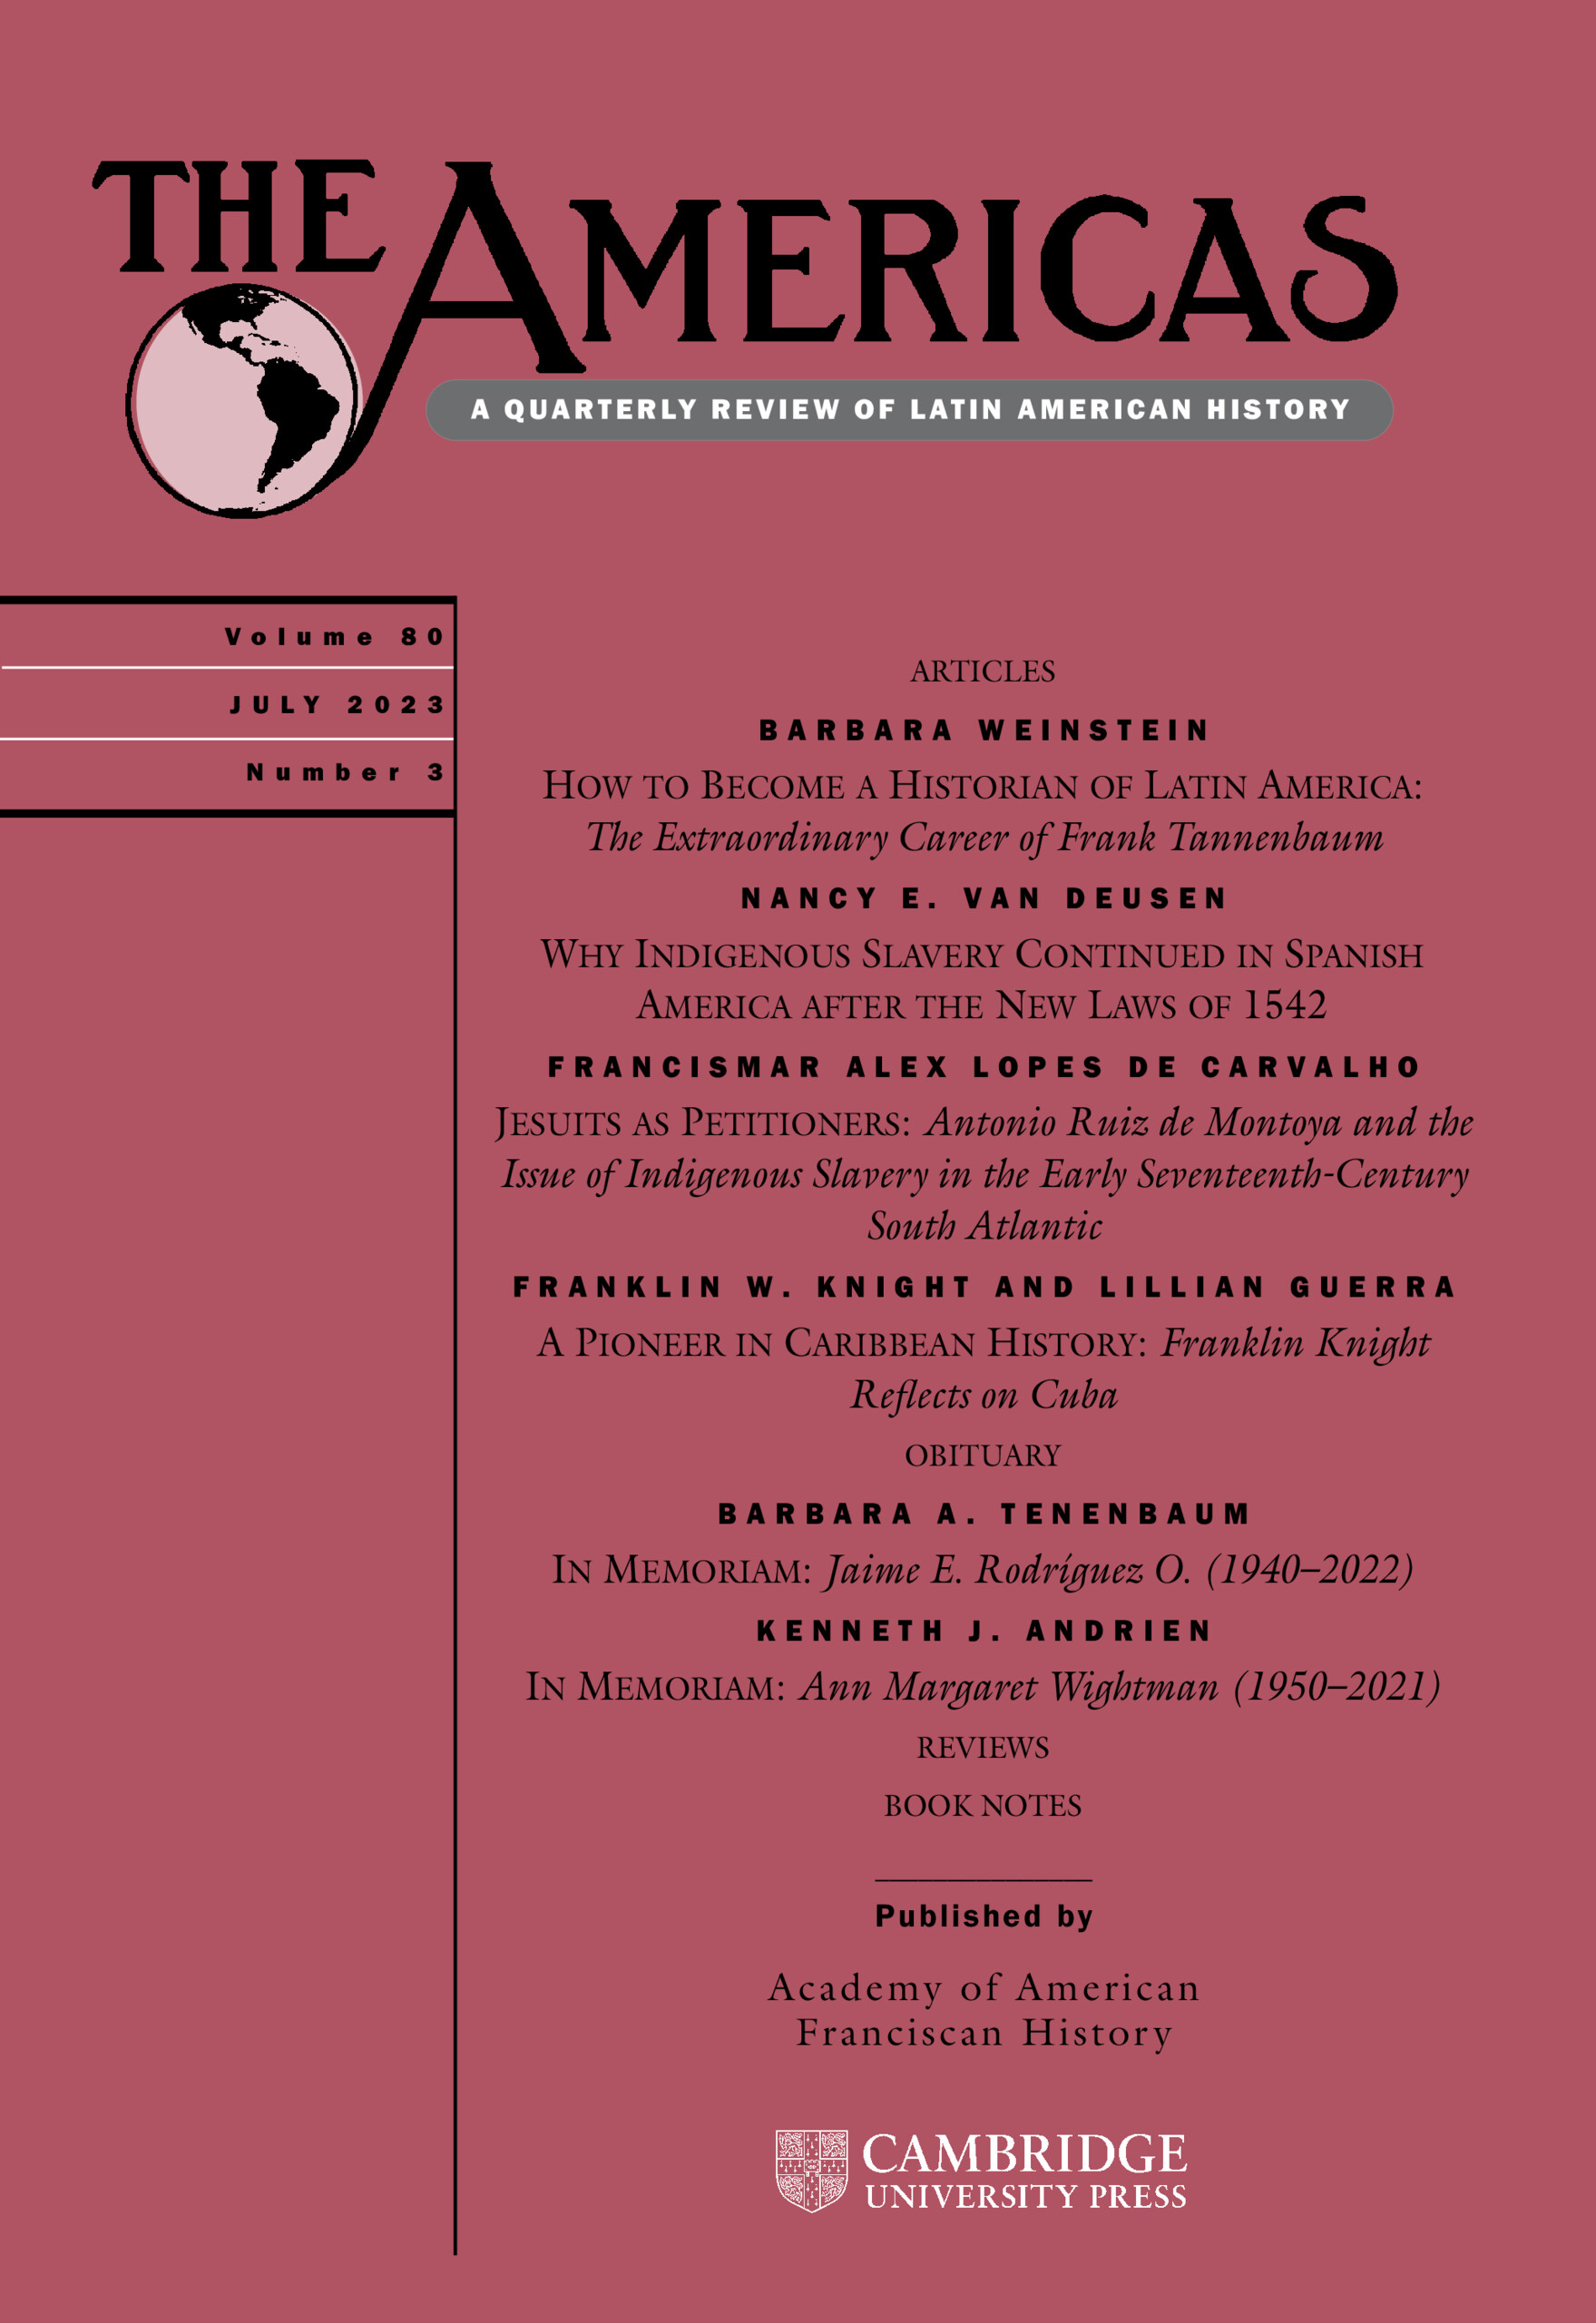 The Americas a quarterly review of Latin American history.